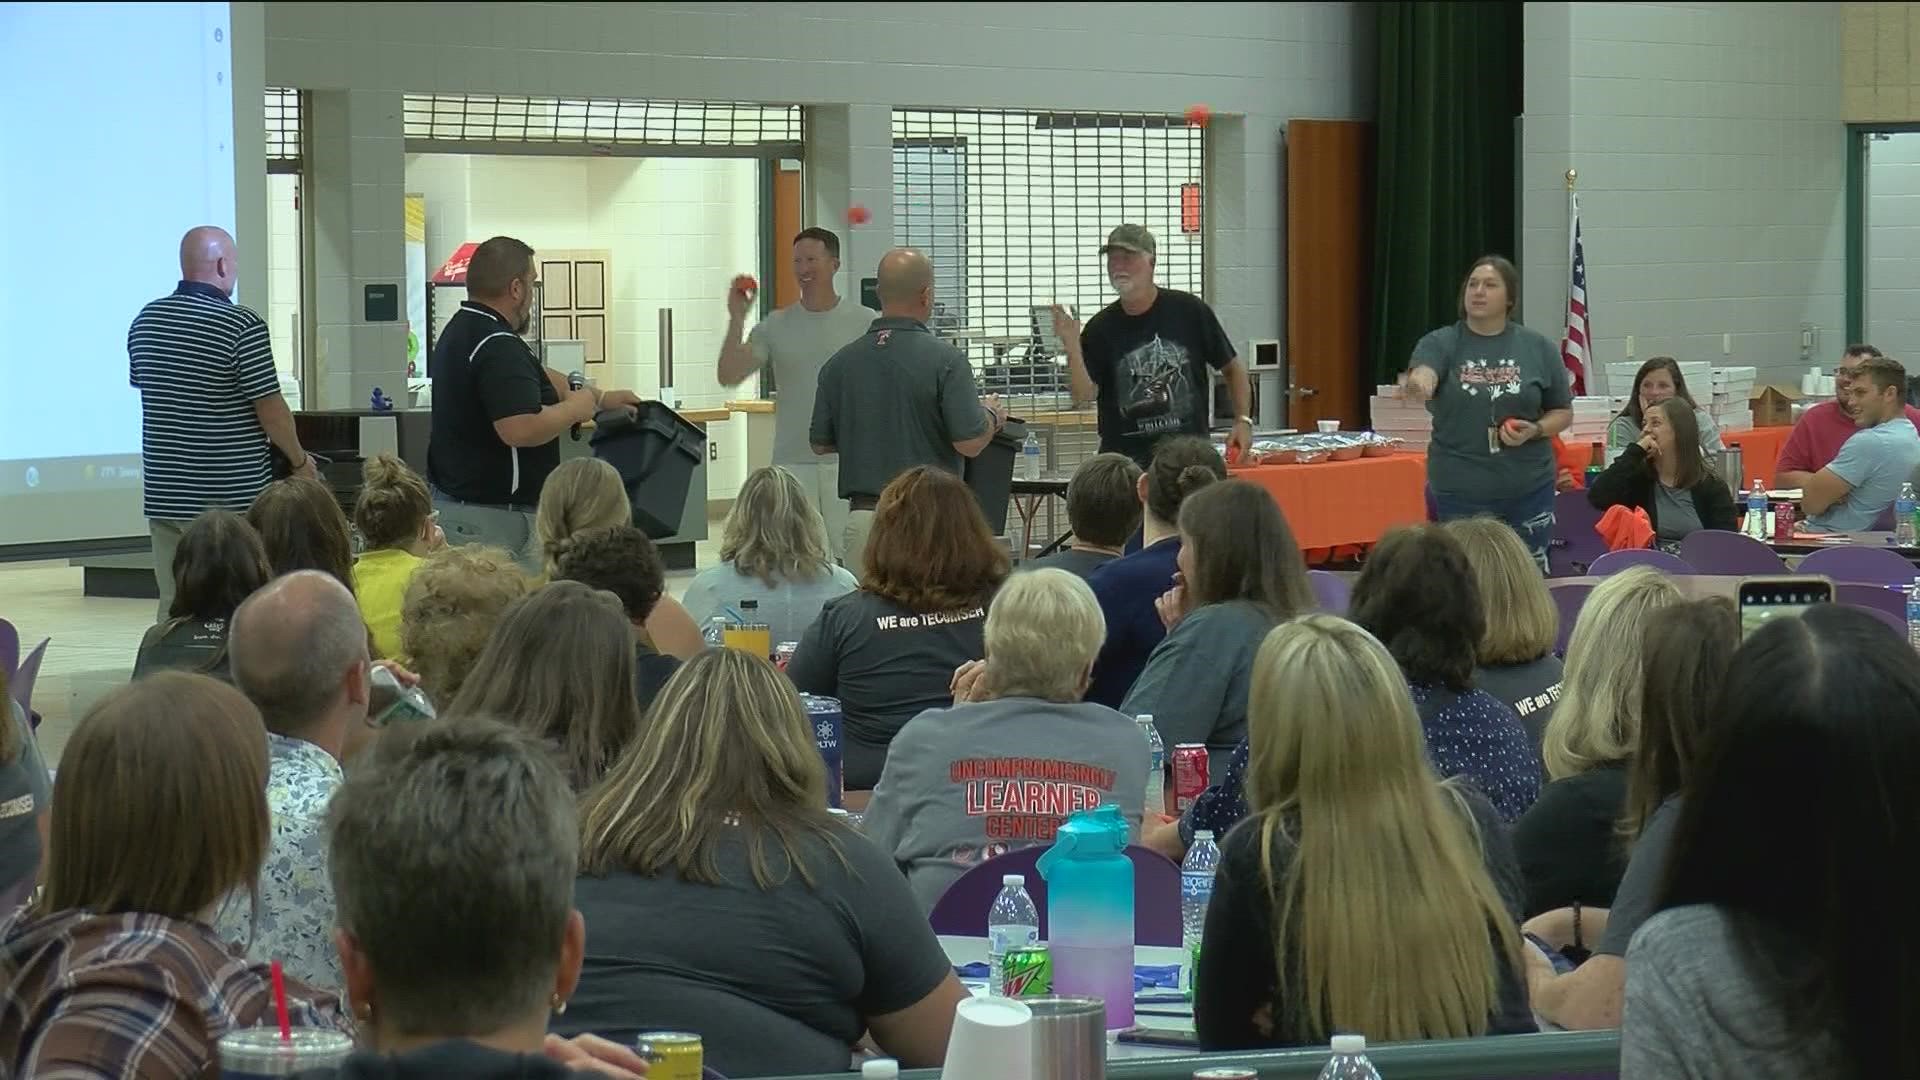 Tecumseh schools is getting ready to kick off the new year by preparing to keep students safe. On Tuesday, the district held ALICE training for staff.